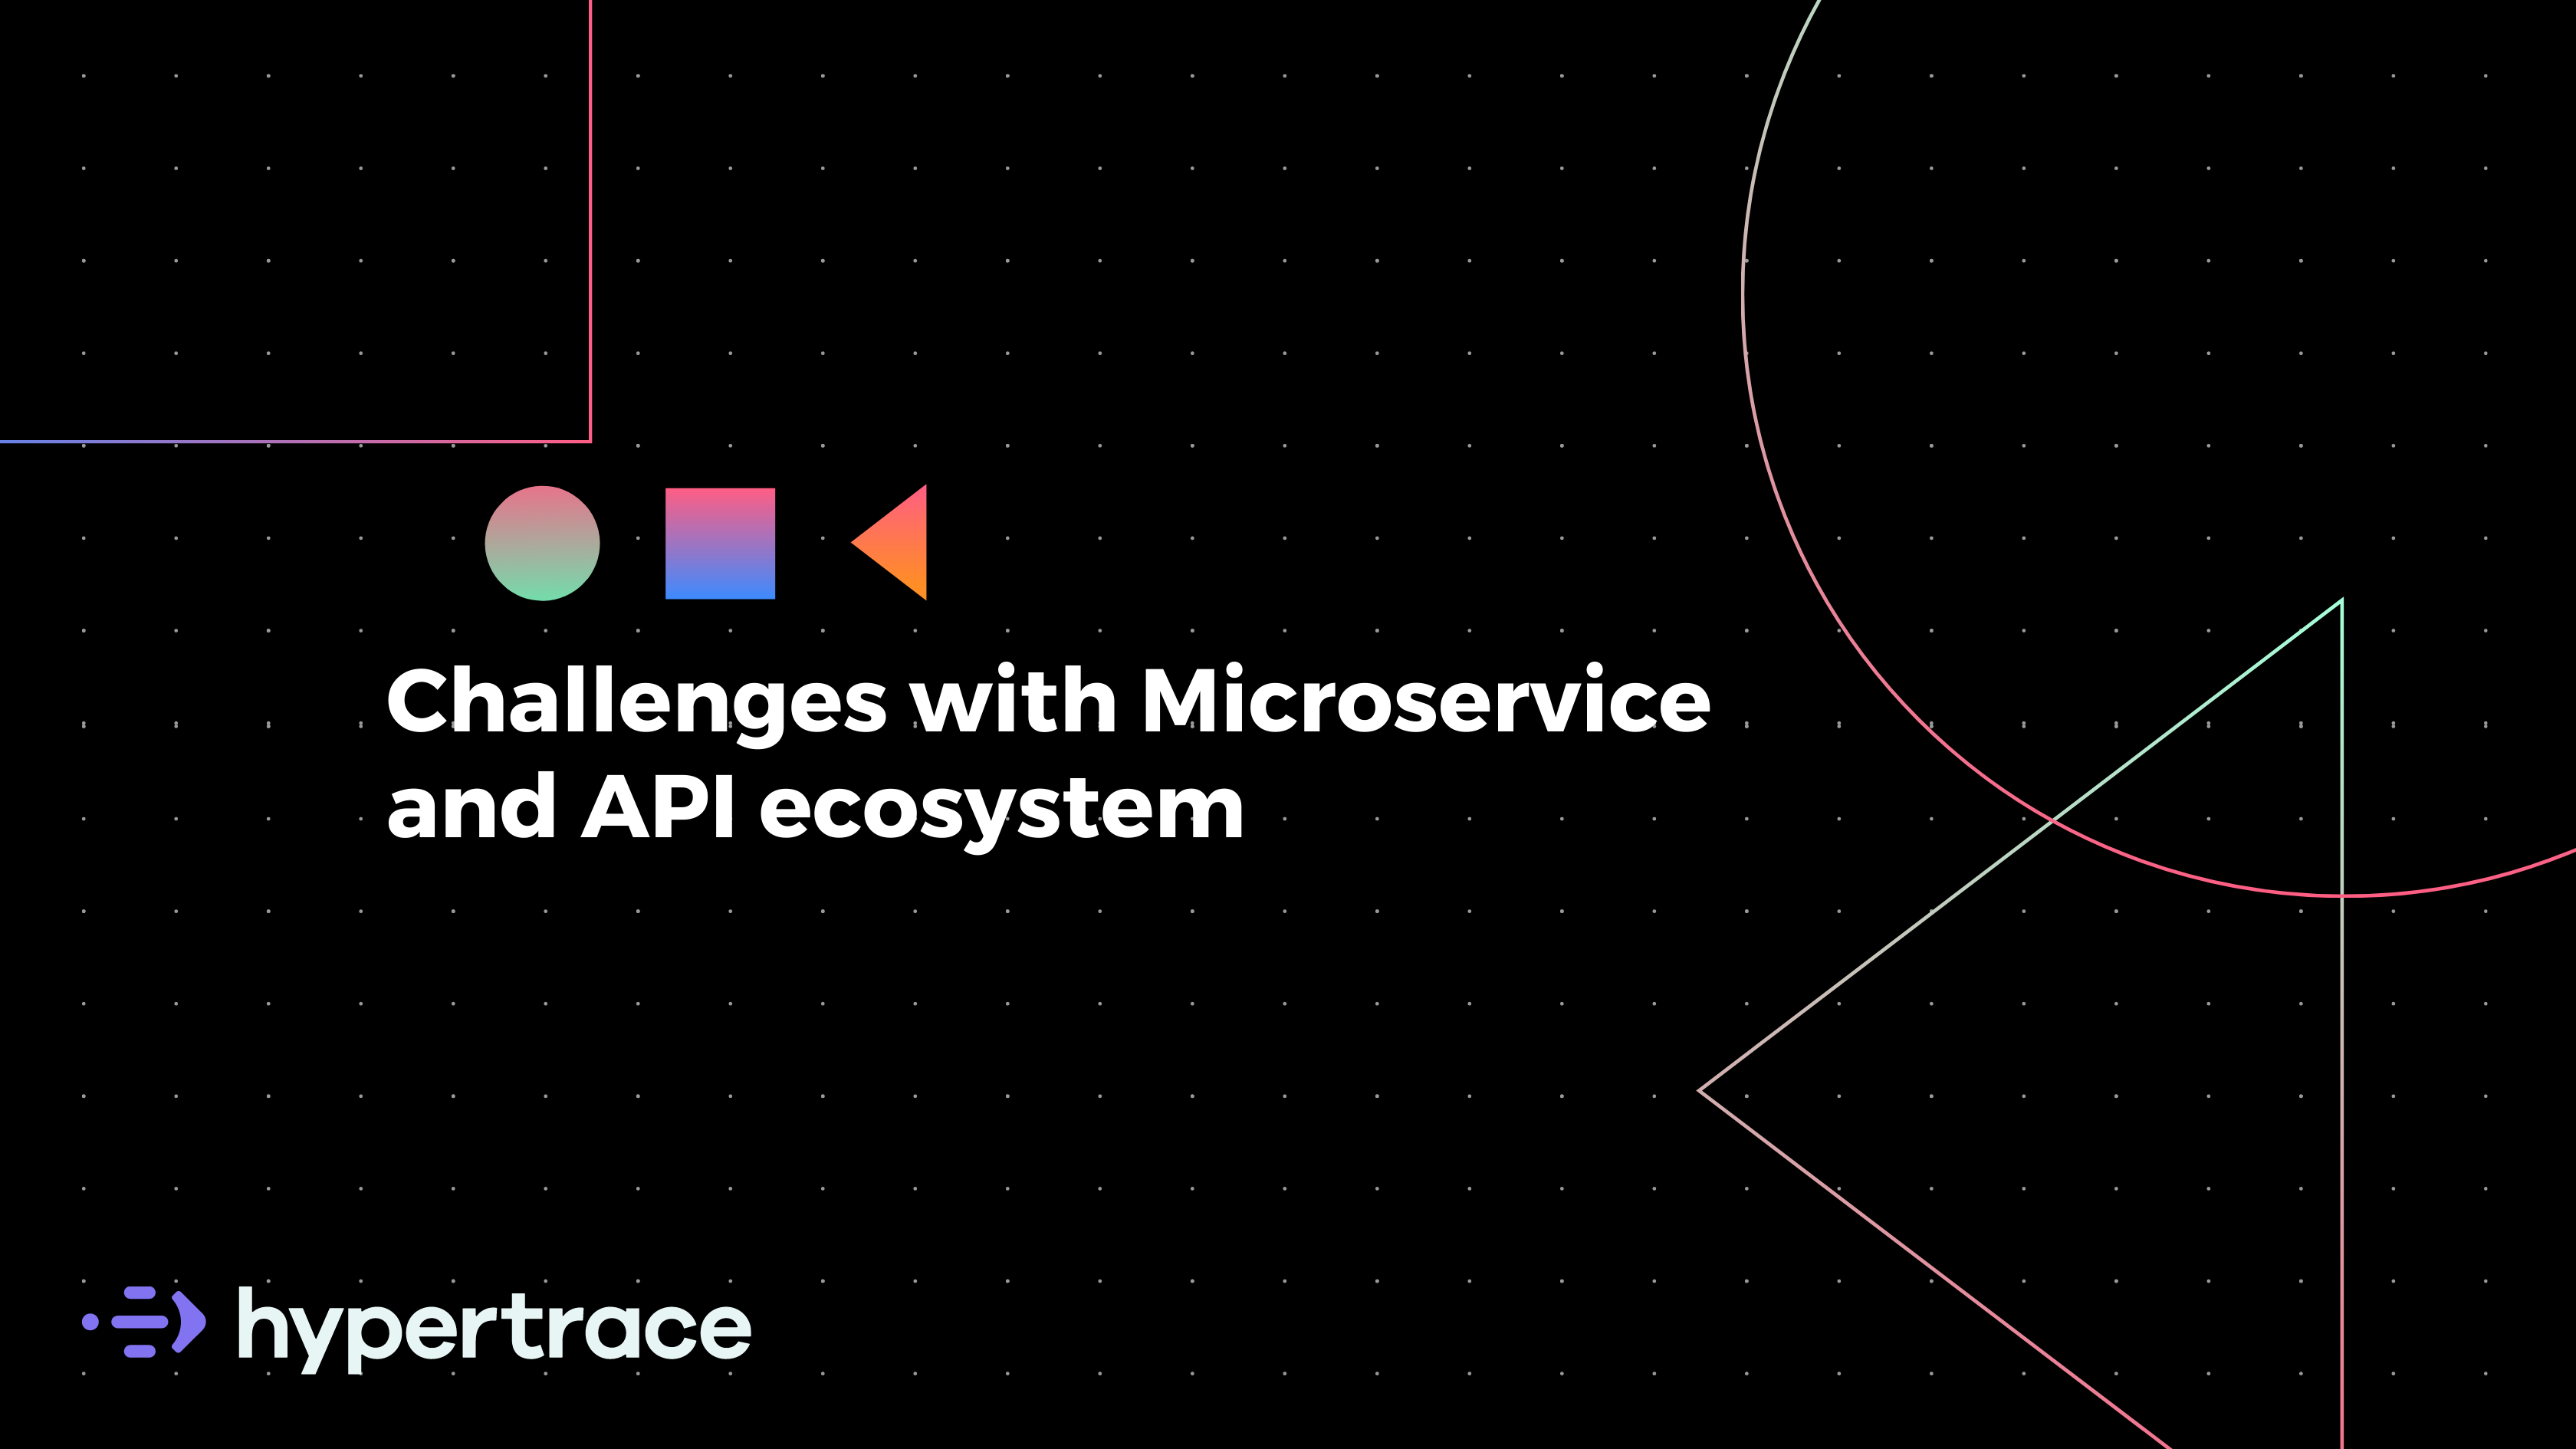 Challenges with Microservice and API ecosystem